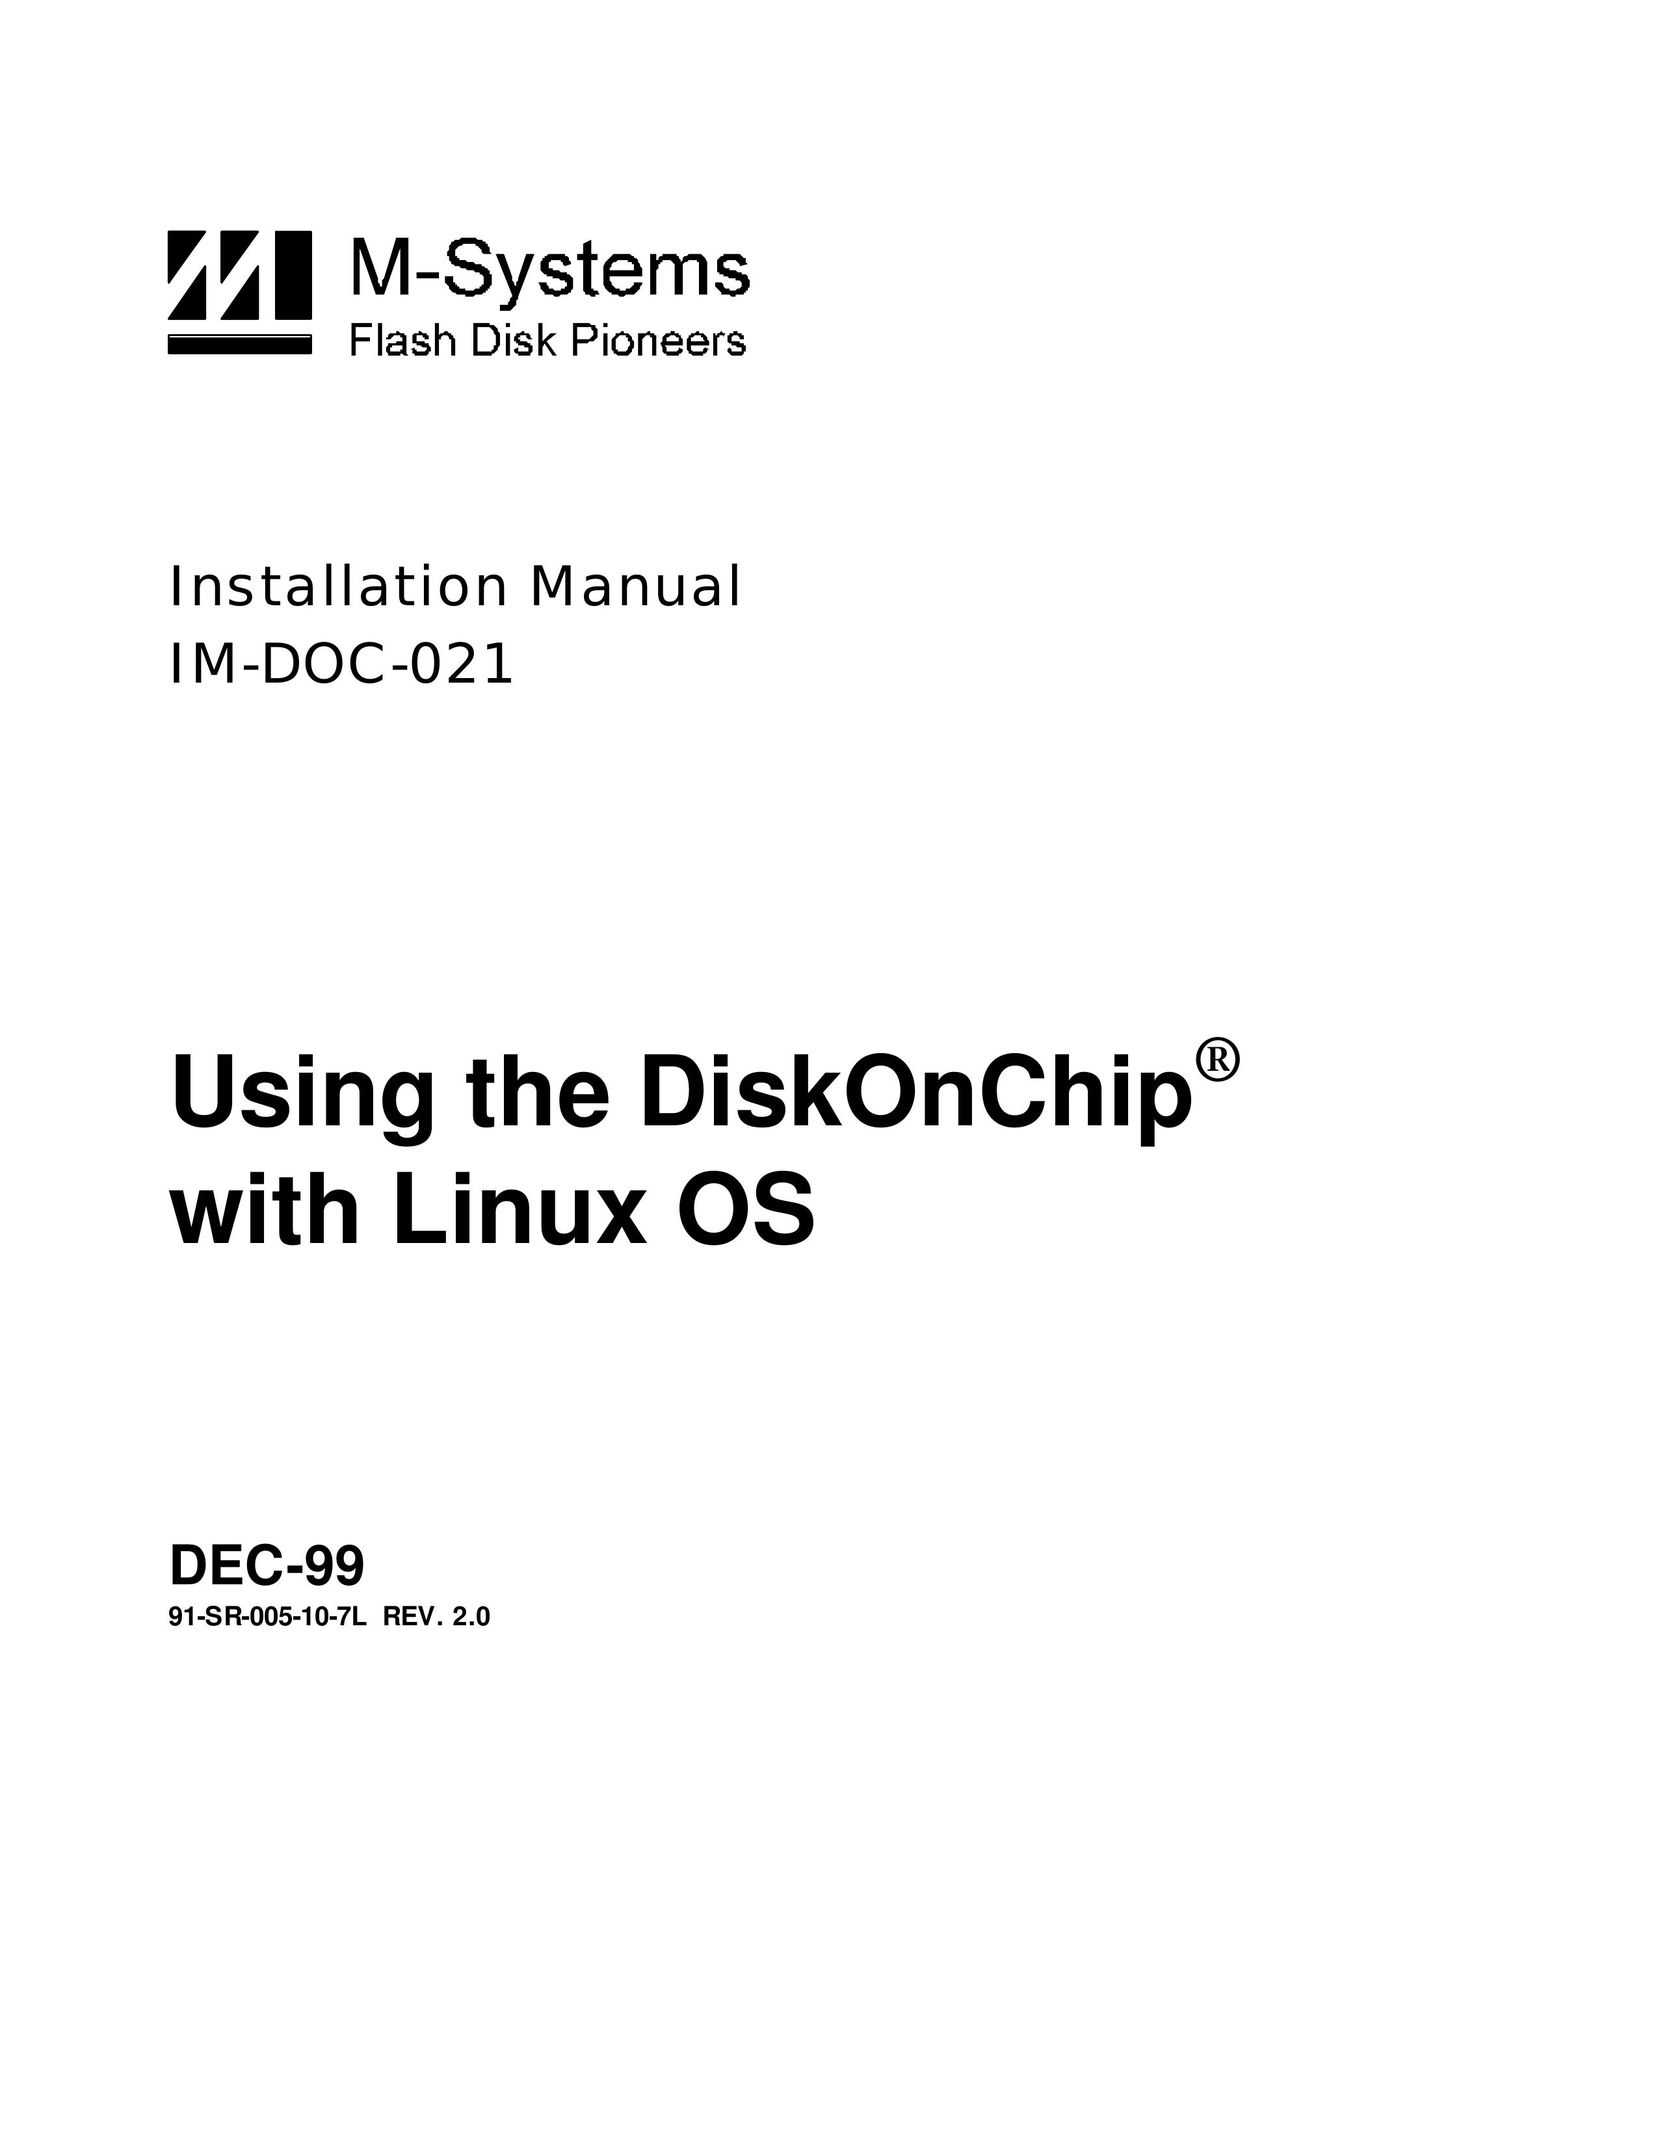 M-Systems Flash Disk Pioneers DiskOnChip Computer Accessories User Manual